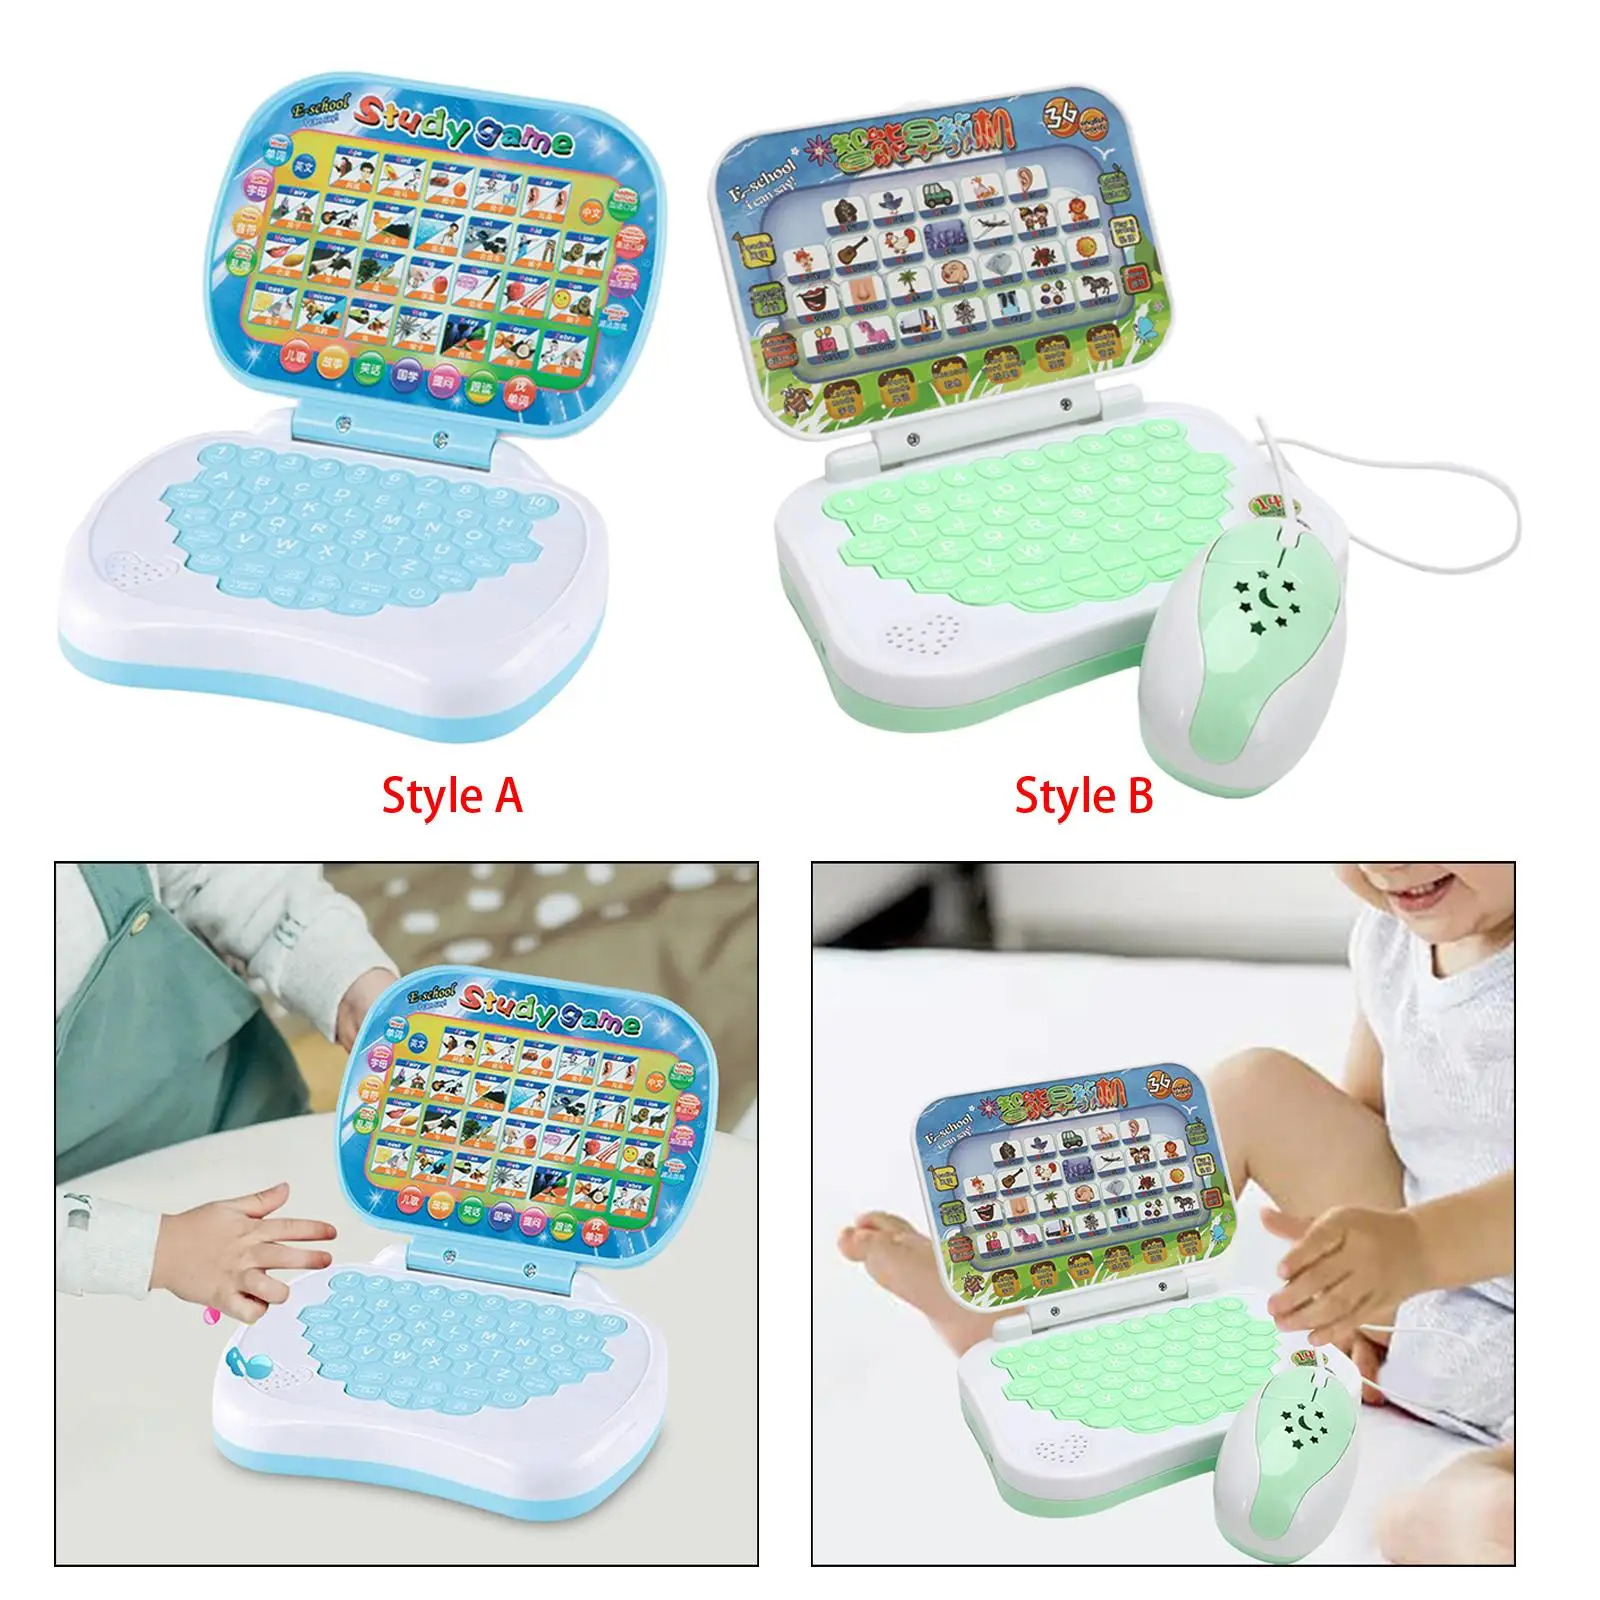 Handheld Language Learning Machine Activities Child Interactive Learning Pad Tablet for Toddler Girls Boys Children Kids